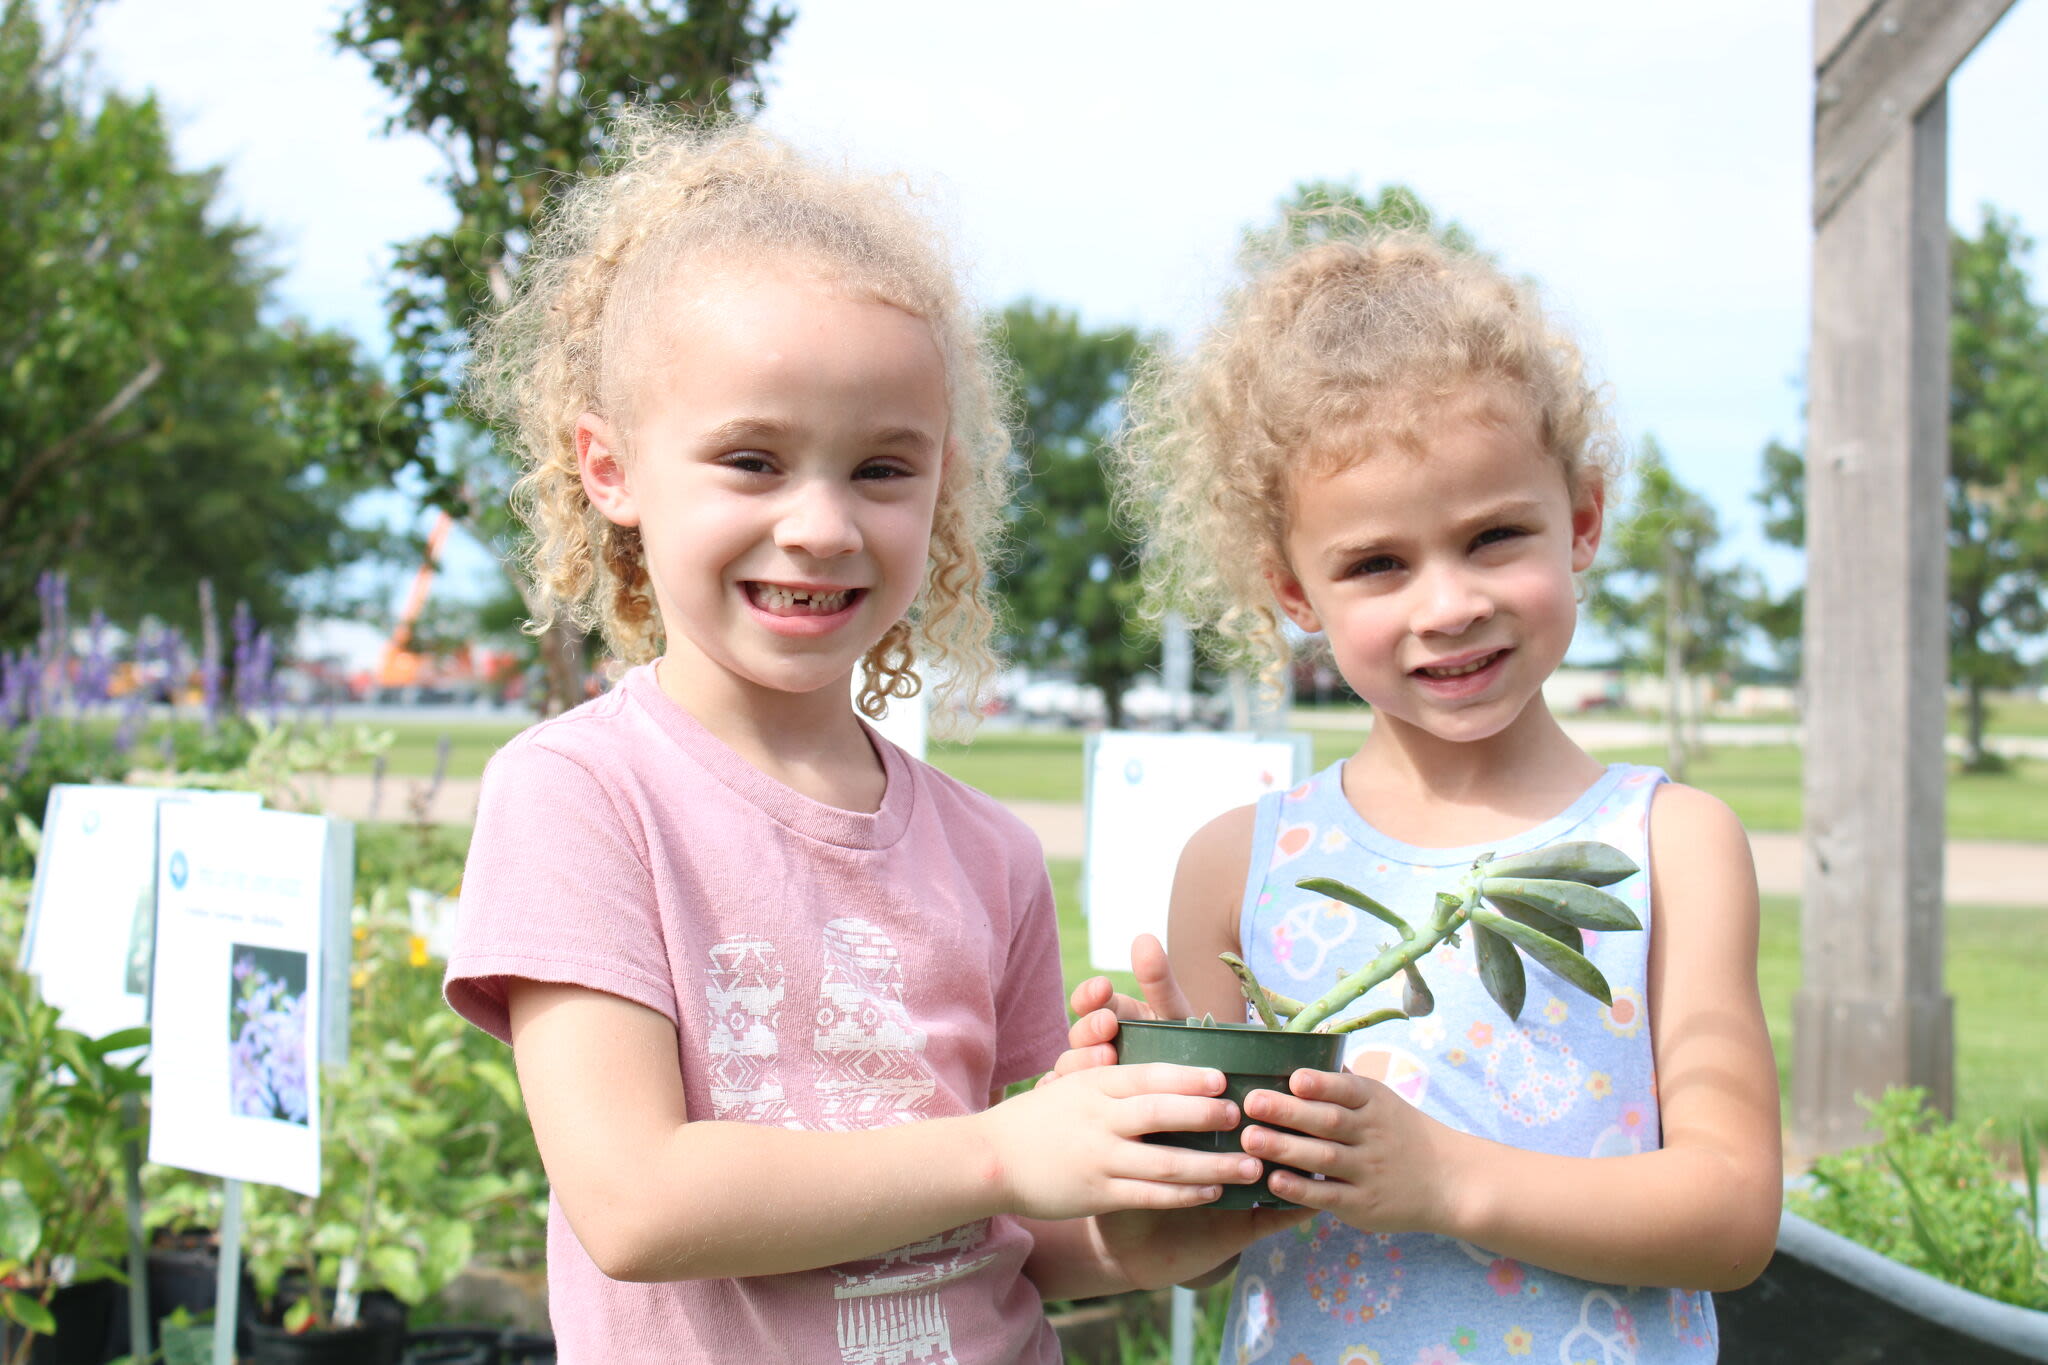 Were you 'Seen' at the Jefferson County Master Gardeners plant sale?